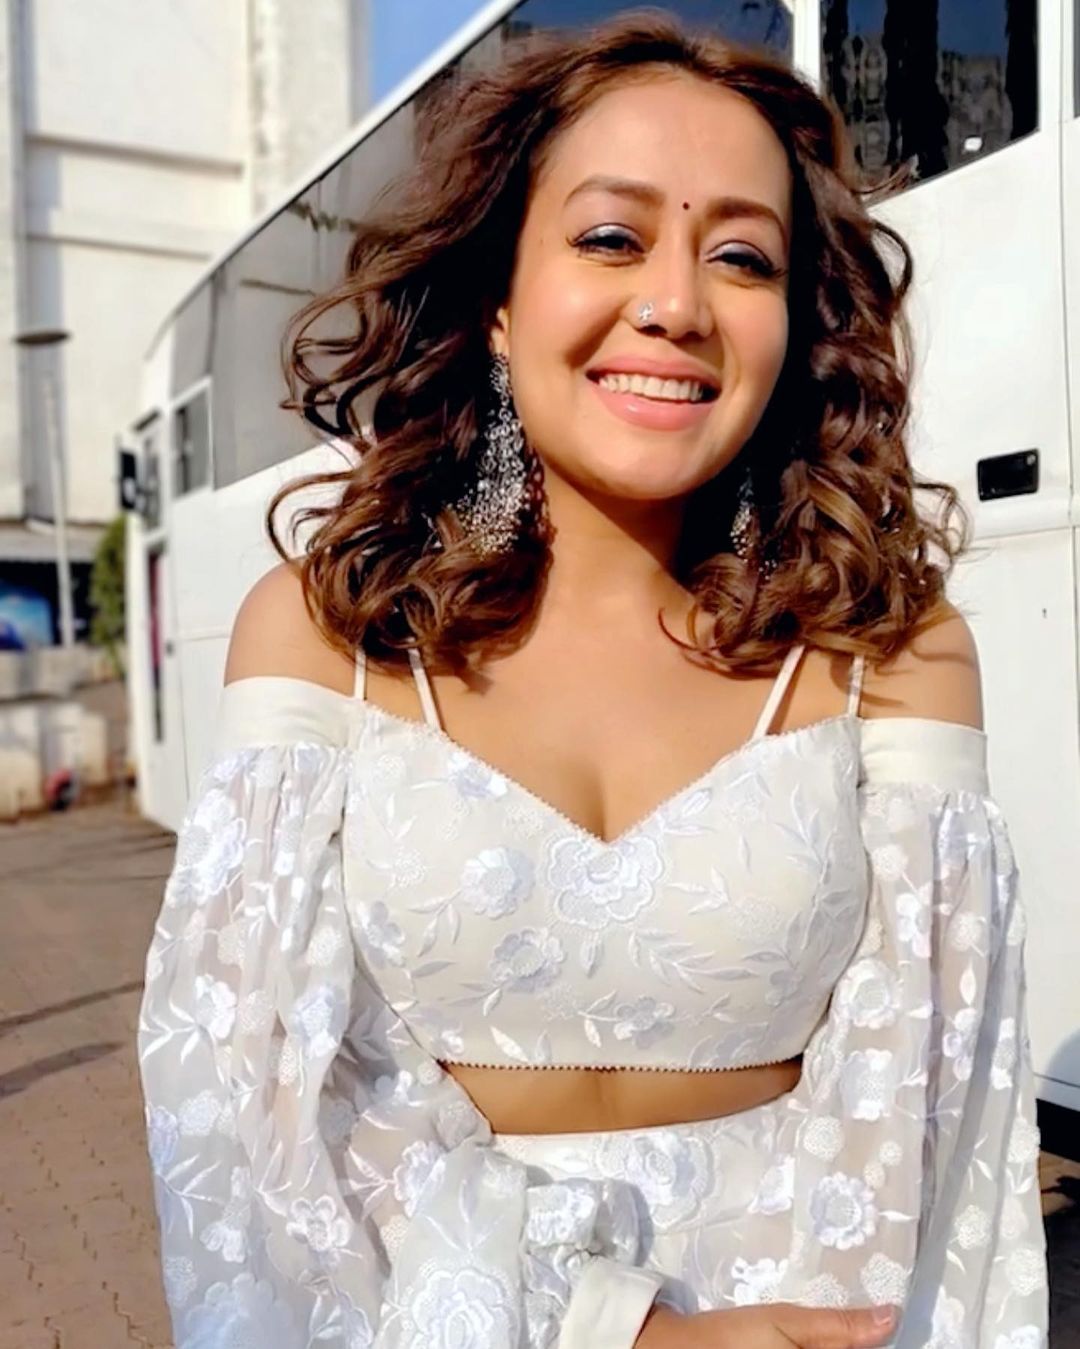 Neha Kakkar Hairstyle Take Hair Styling Tips For Curly Hair For Girls   IWMBuzz